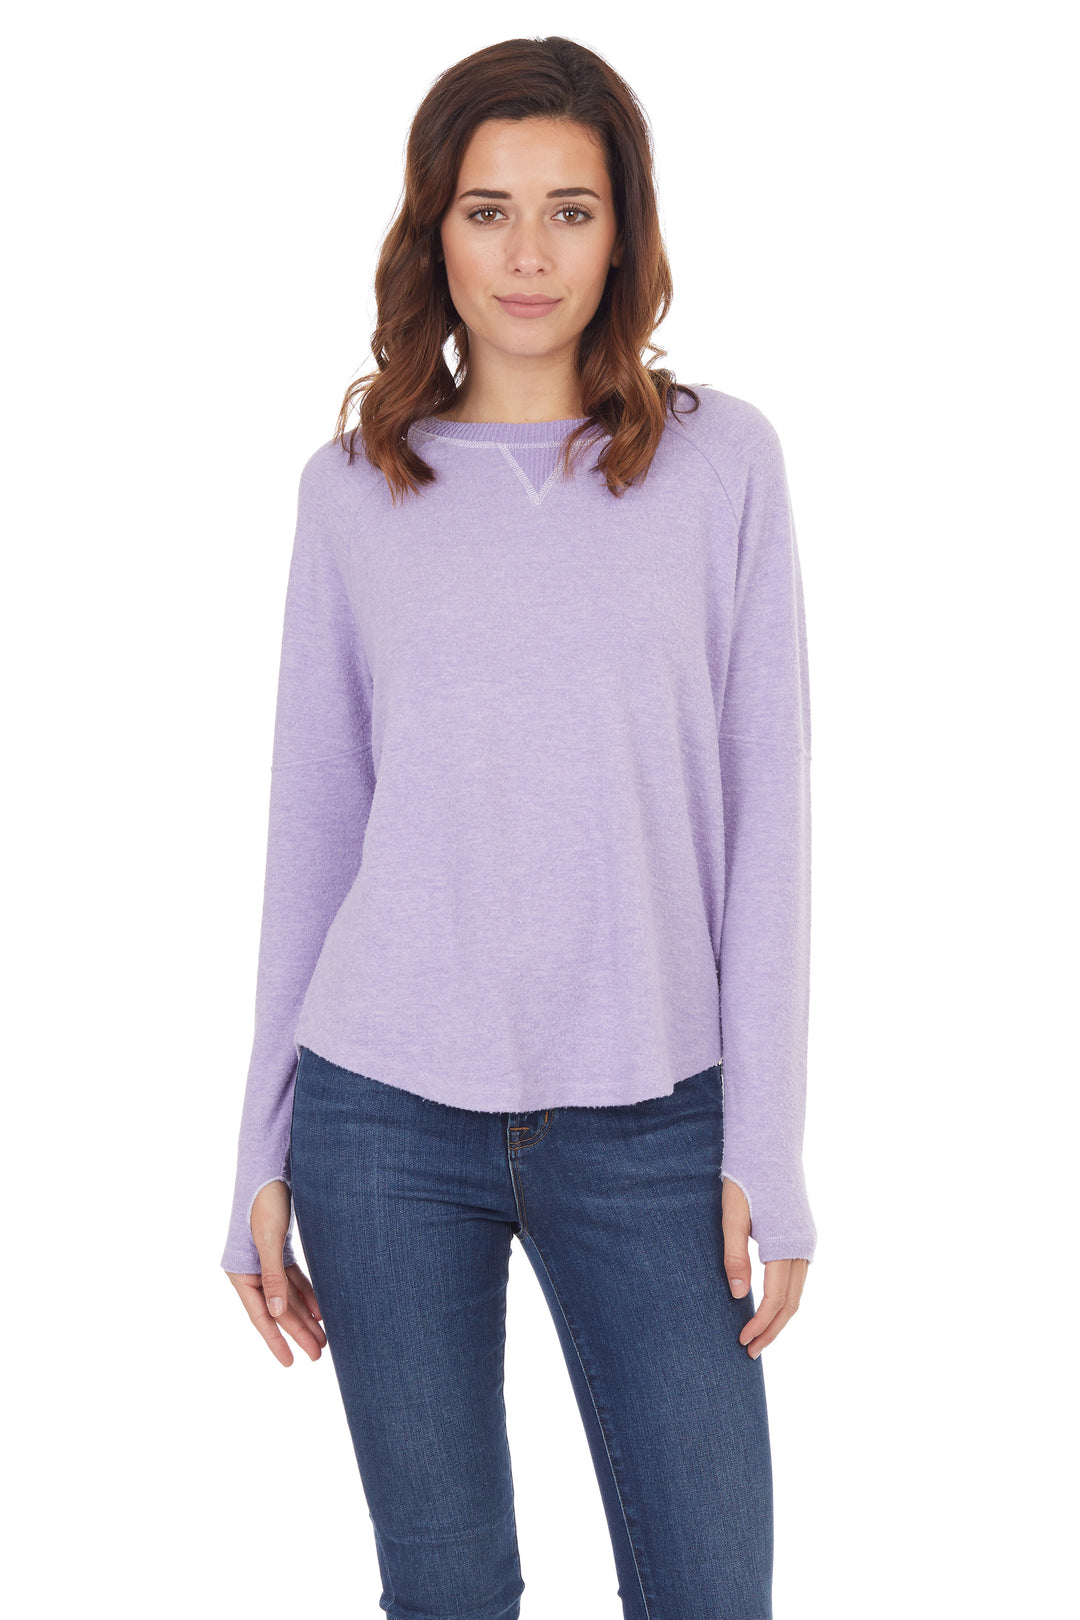 Lavender Heather Knit Top With Thumbhole - Kingfisher Road - Online Boutique